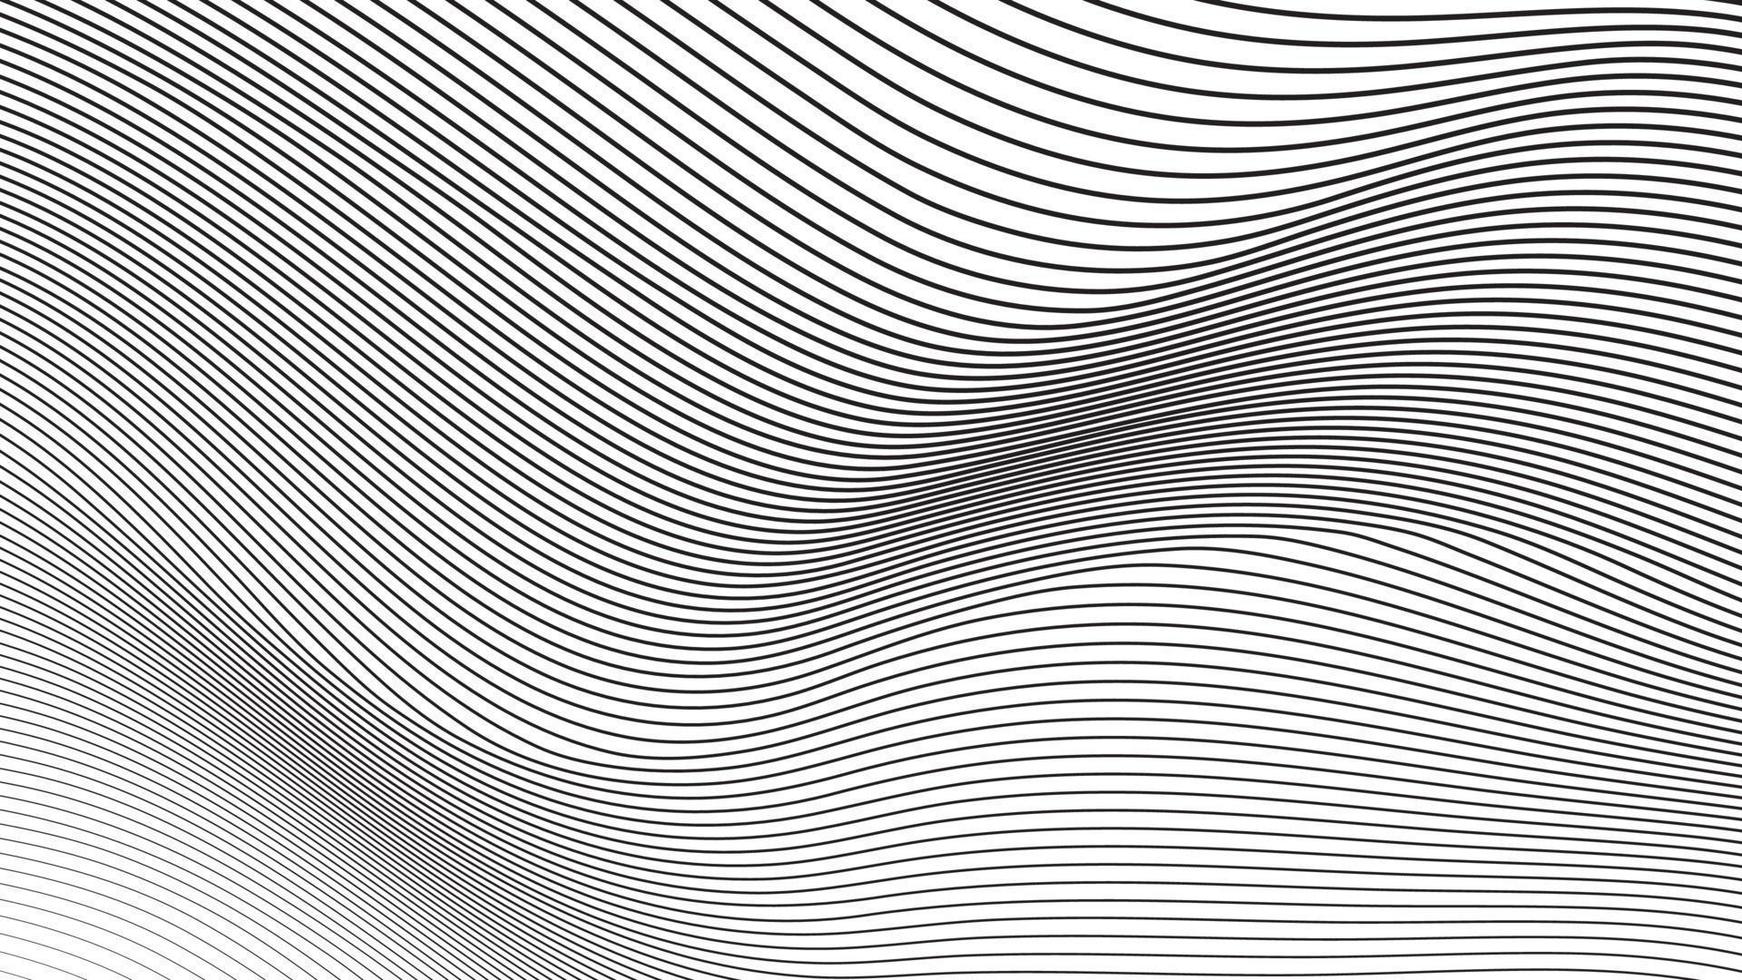 Abstract warped Diagonal Striped vector Background. Vector curved twisted slanting, waved lines texture.